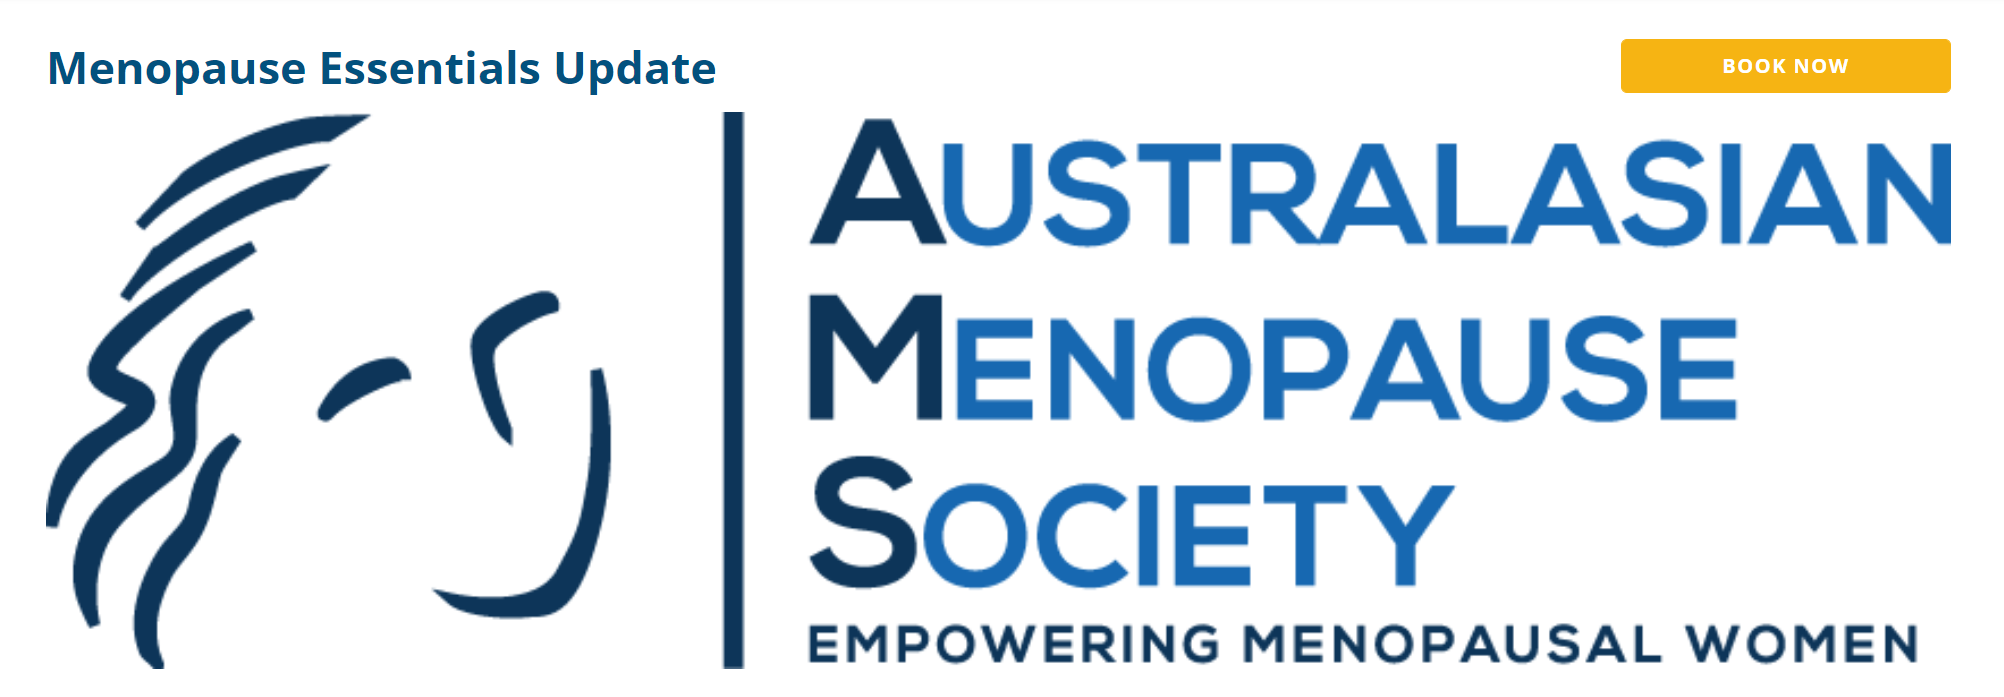 Adelaide Event: Menopause Essentials Update – 4th June thumbnail